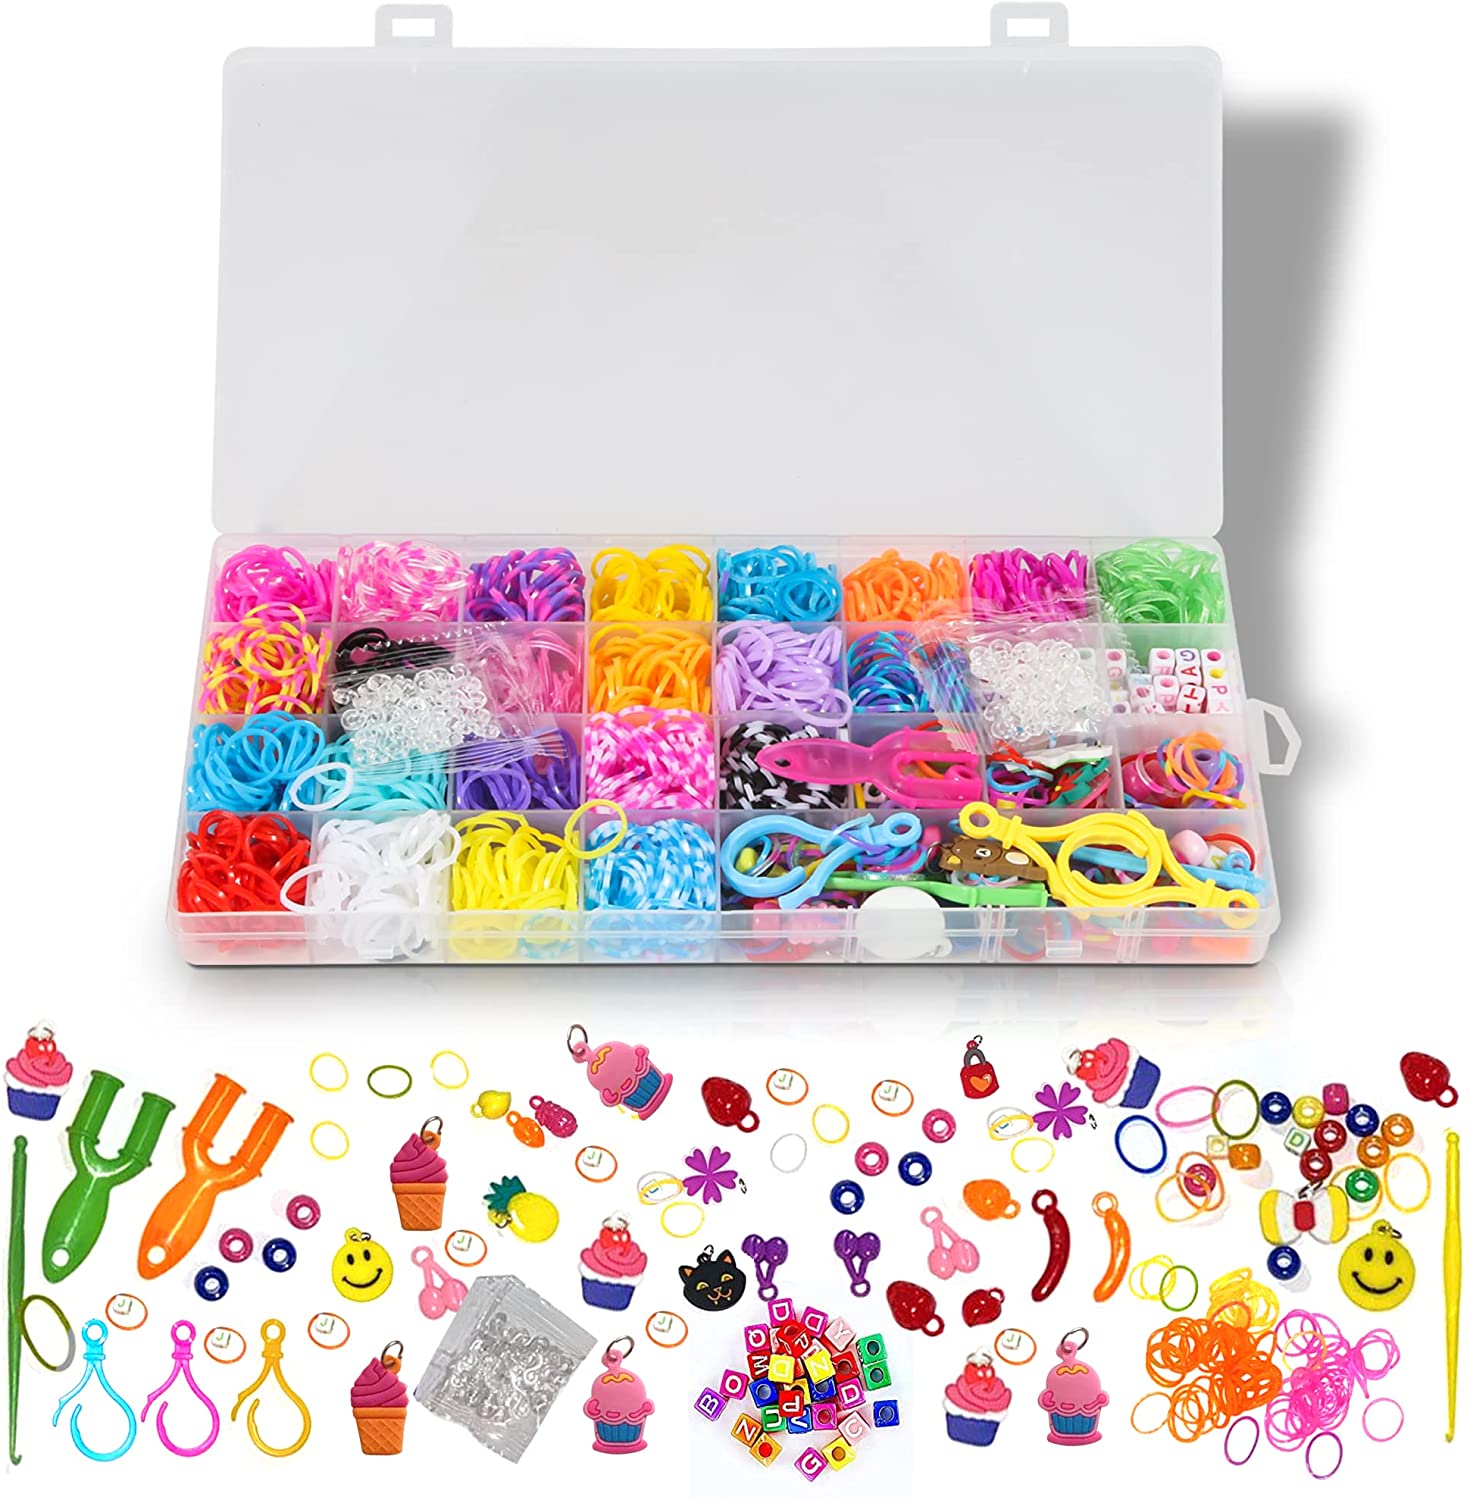 NICALE Loom Rubber Band Bracelet kit for Girls, Boys - 1500 + DIY Colored  Rubber Bands, Skin-Friendly - Birthday, Friendship Gift for Anyone.